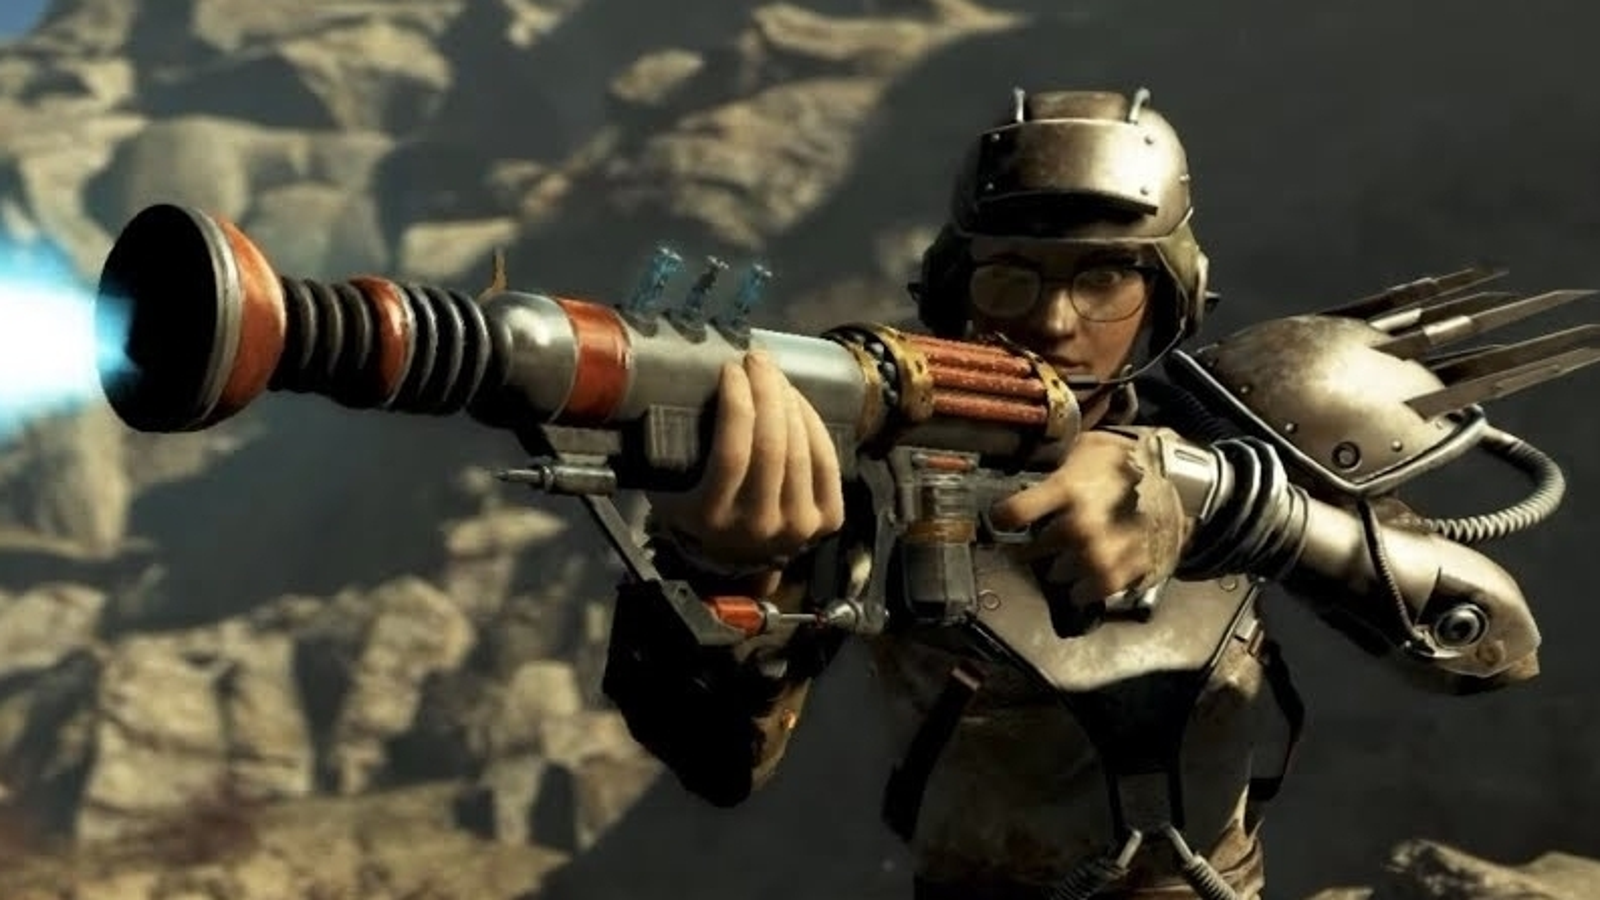 best fallout 4 new vegas mods for ps4｜TikTok Search